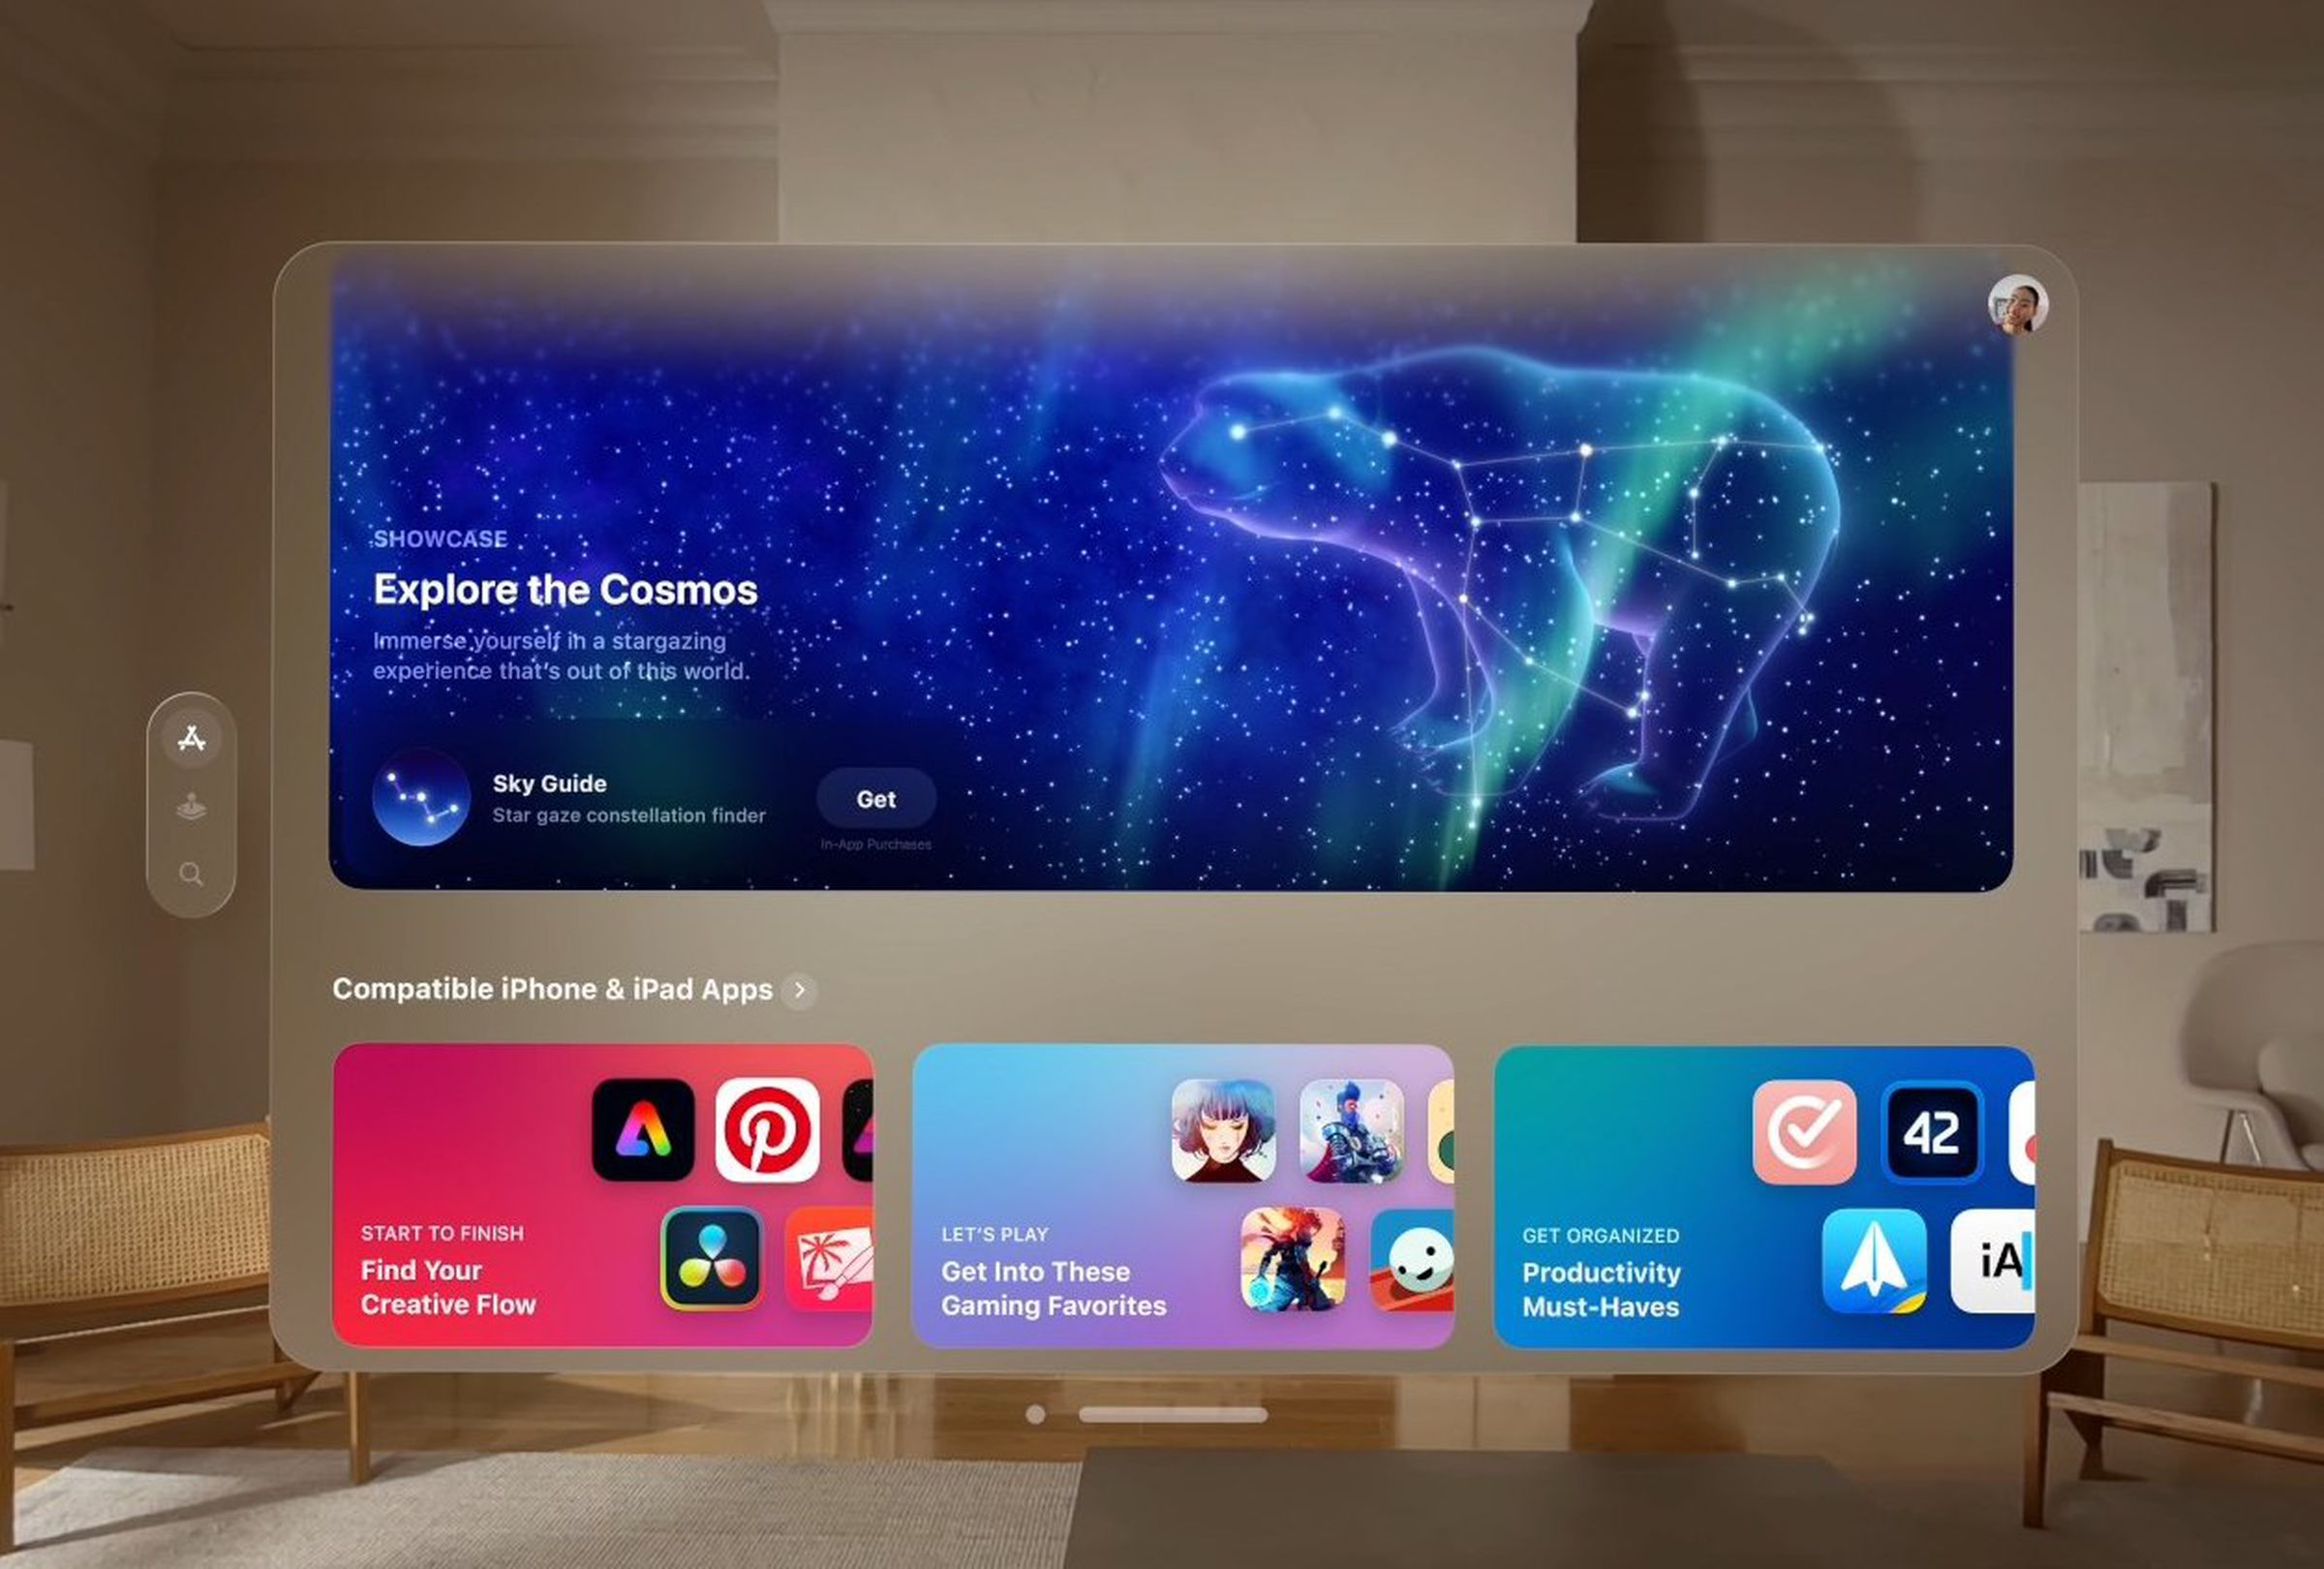 The App Store as seen from within the Apple Vision Pro headset, with a constellation finder experience, as well as other app suggestions.